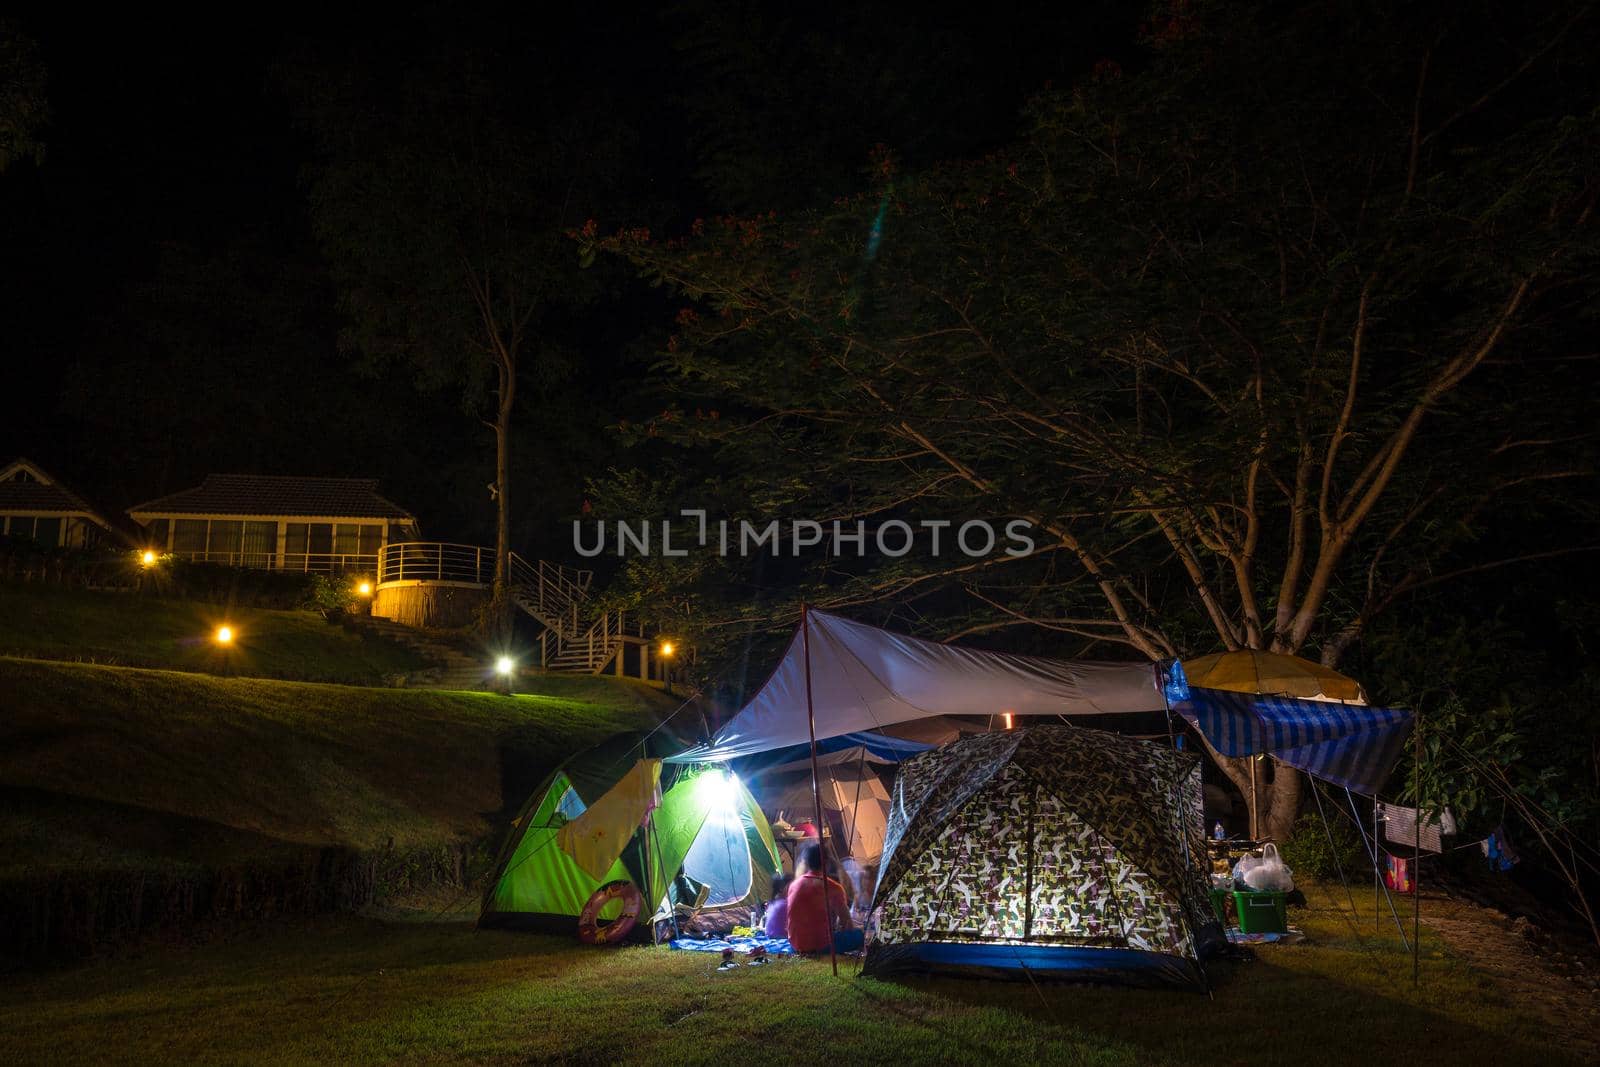 Camping and tent in the park at night by domonite